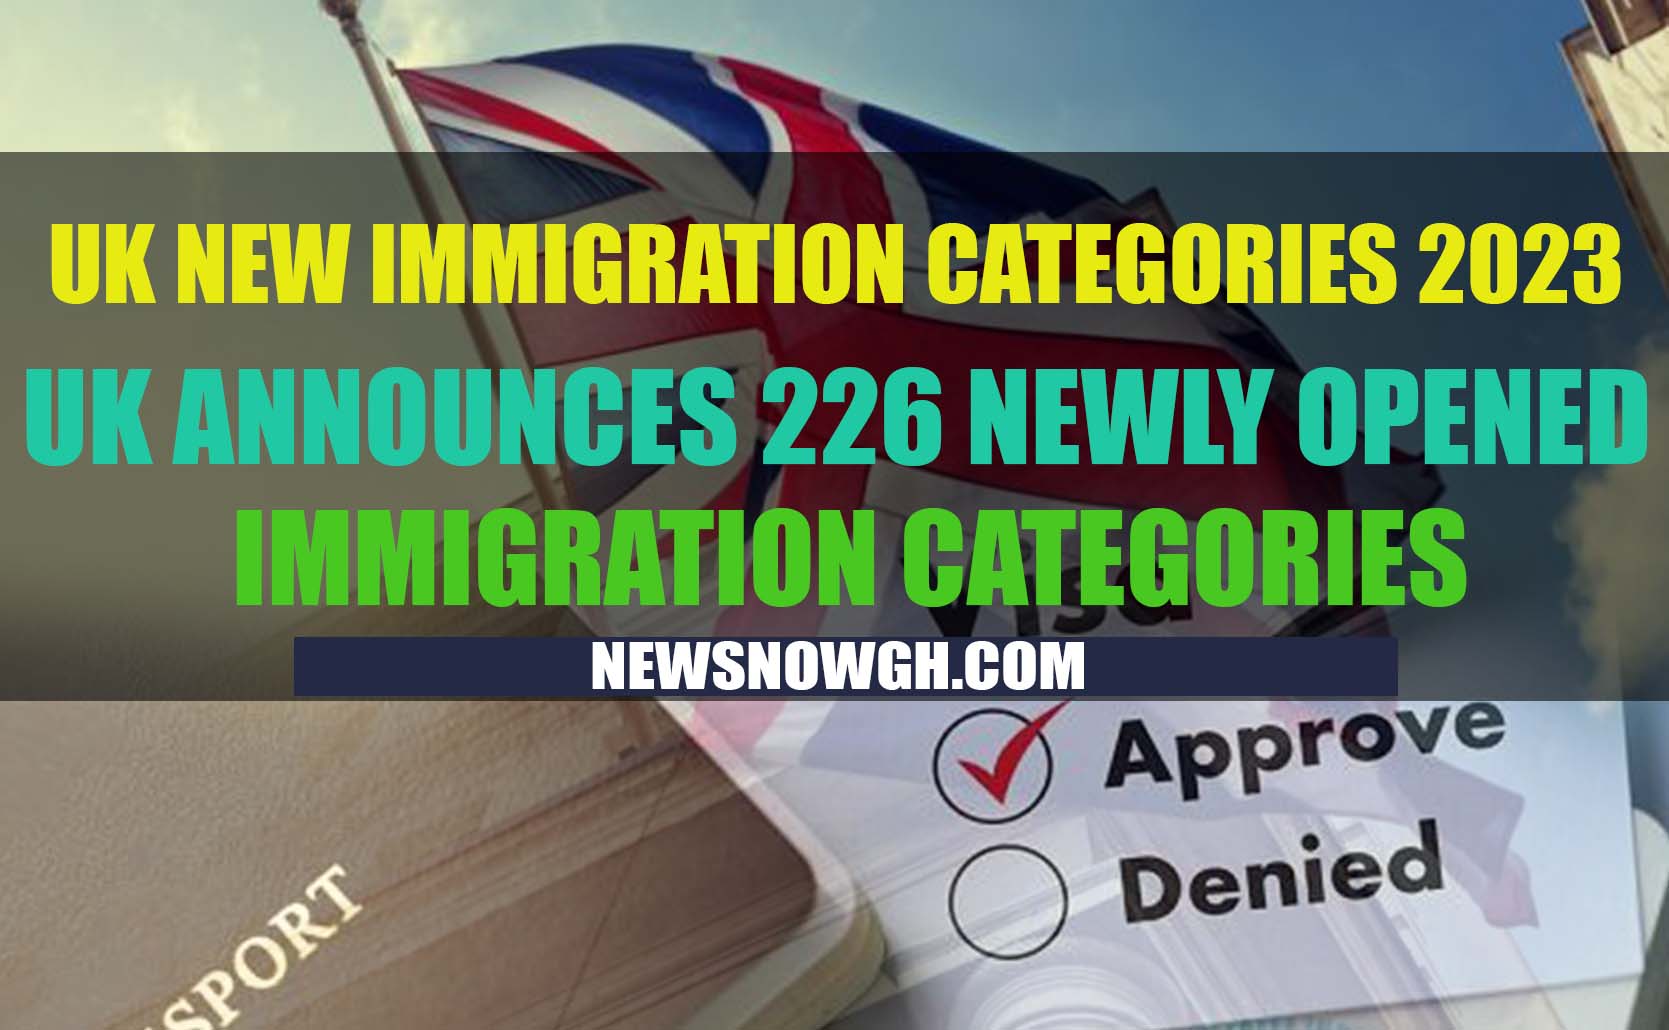 UK Announces 226 Newly Opened Immigration Categories